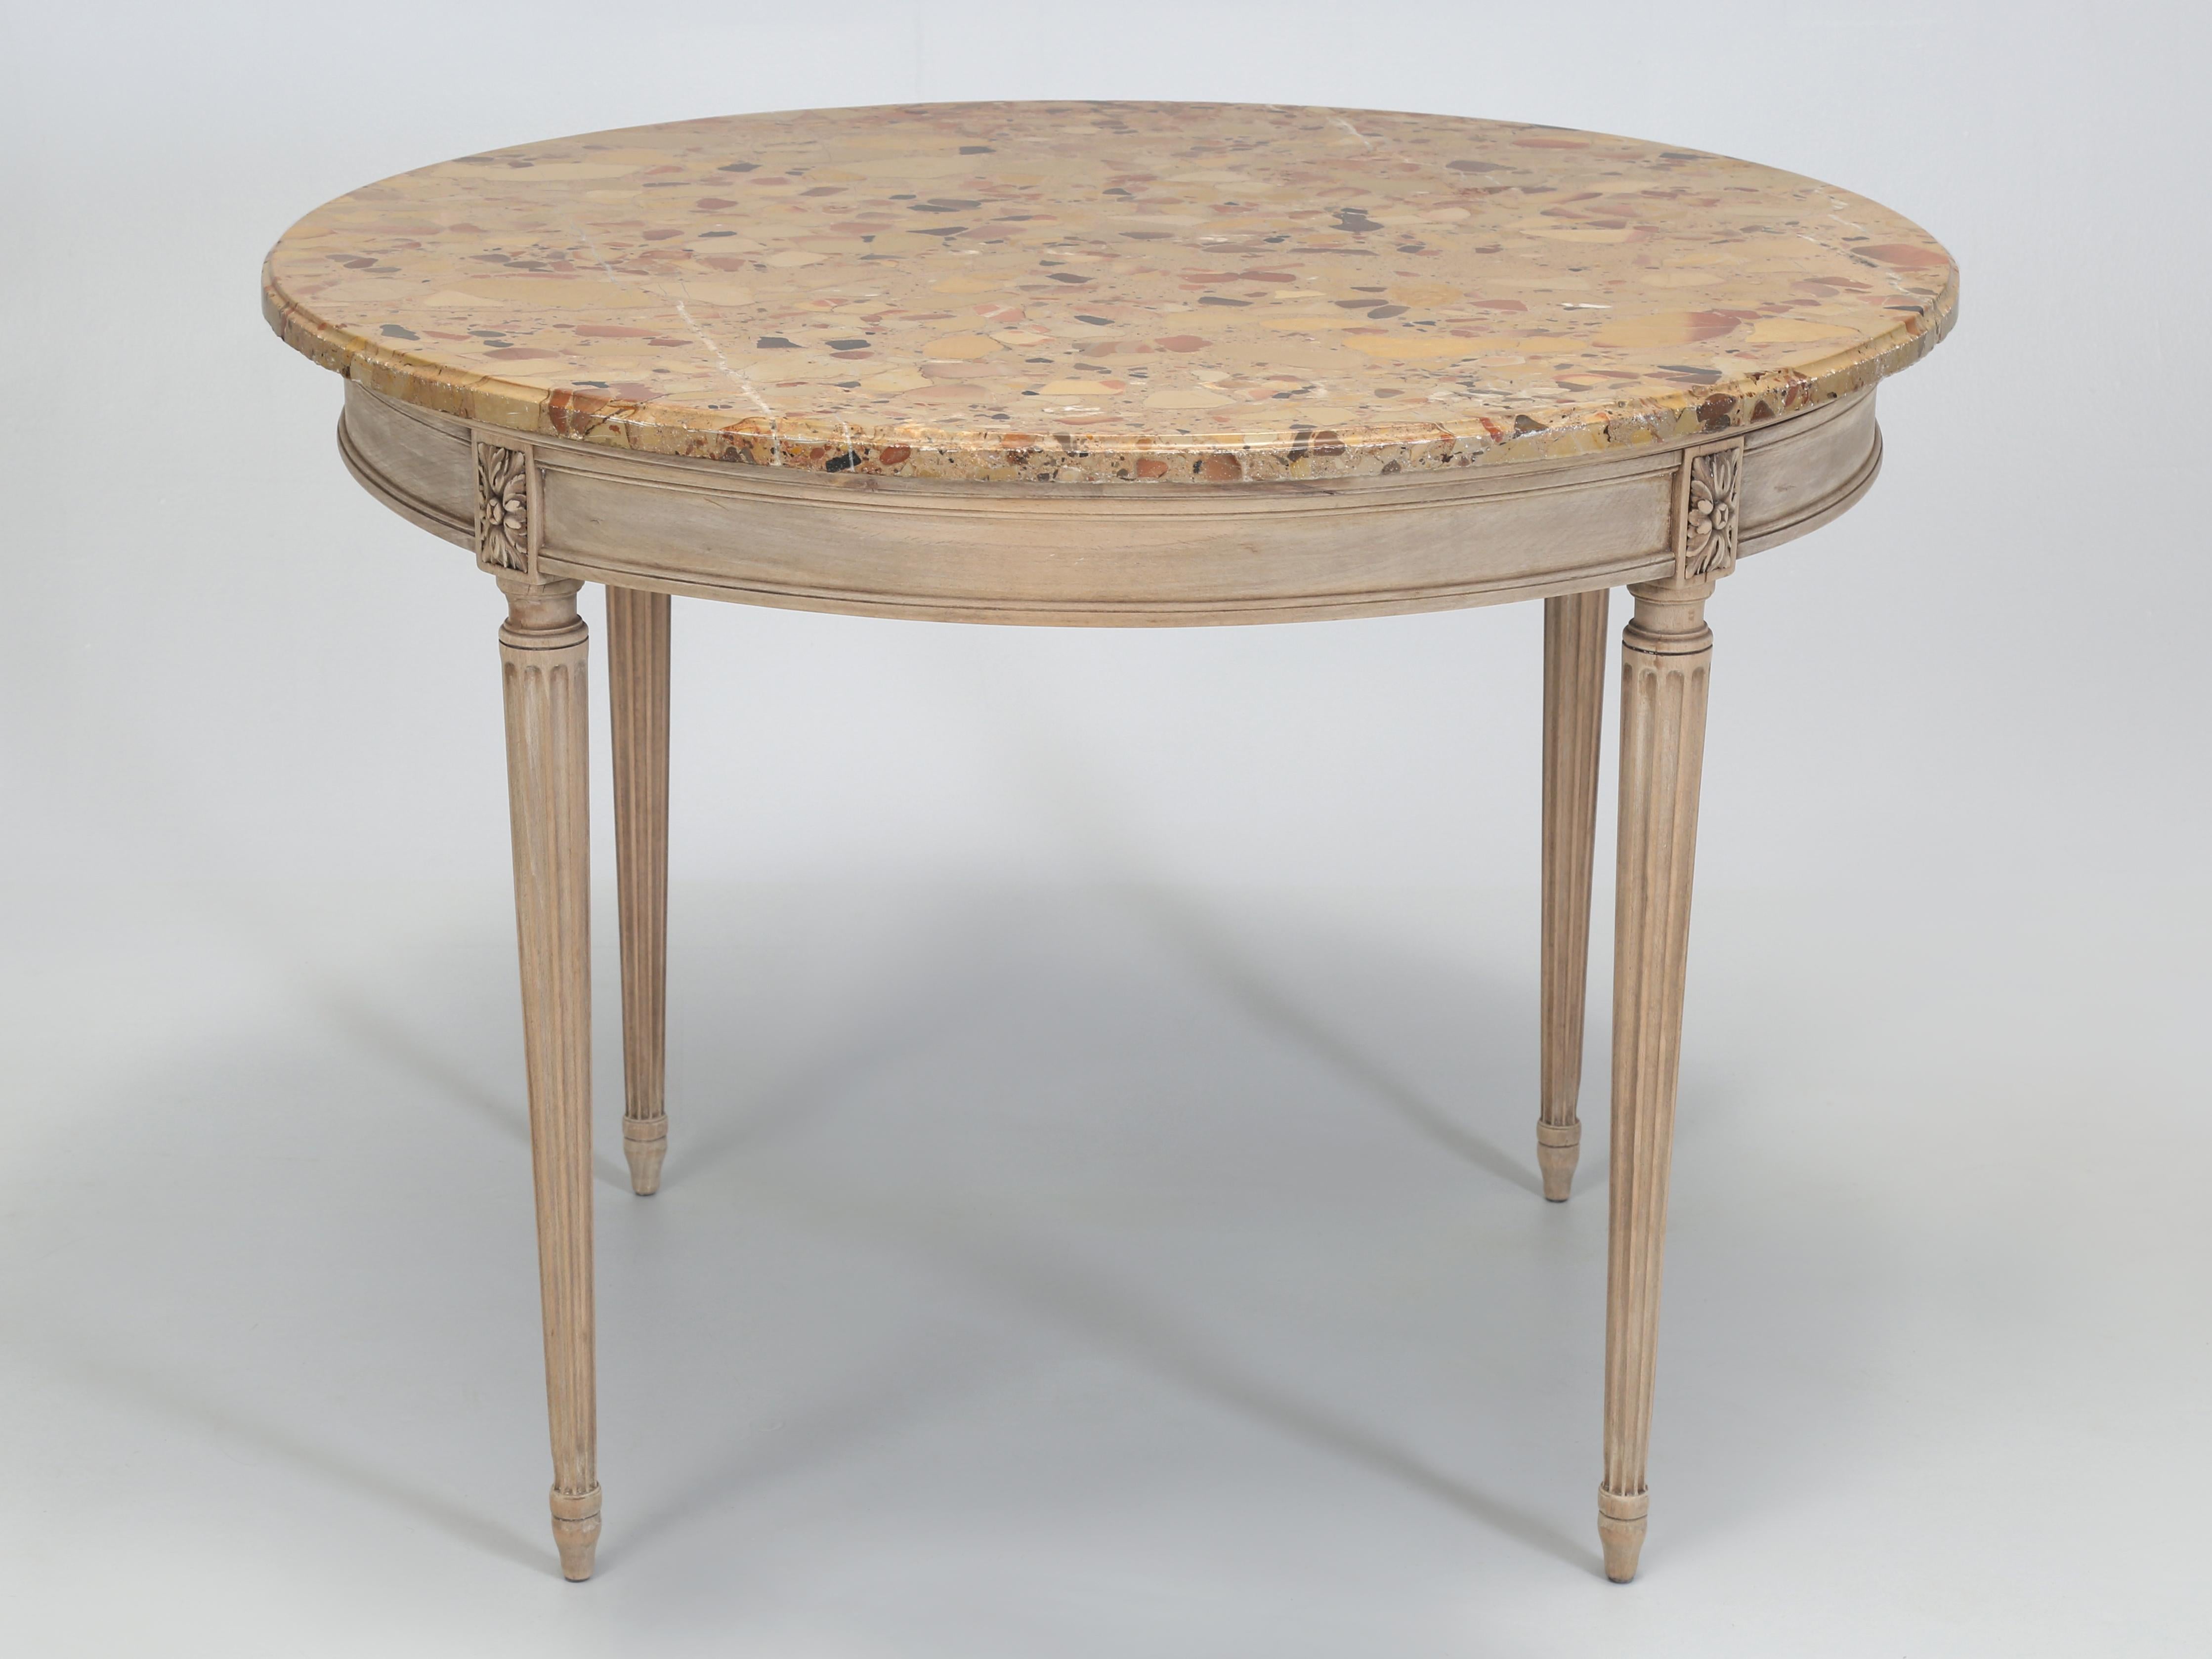 Antique French Louis XVI Kitchen Table or Small Dining Room Table that was purchased new at Gallot Frères (brothers) Shop located at 54 Avenue de Suffren in Paris. Our Antique Marble Top Louis XVI Round Table was found in the small Village of